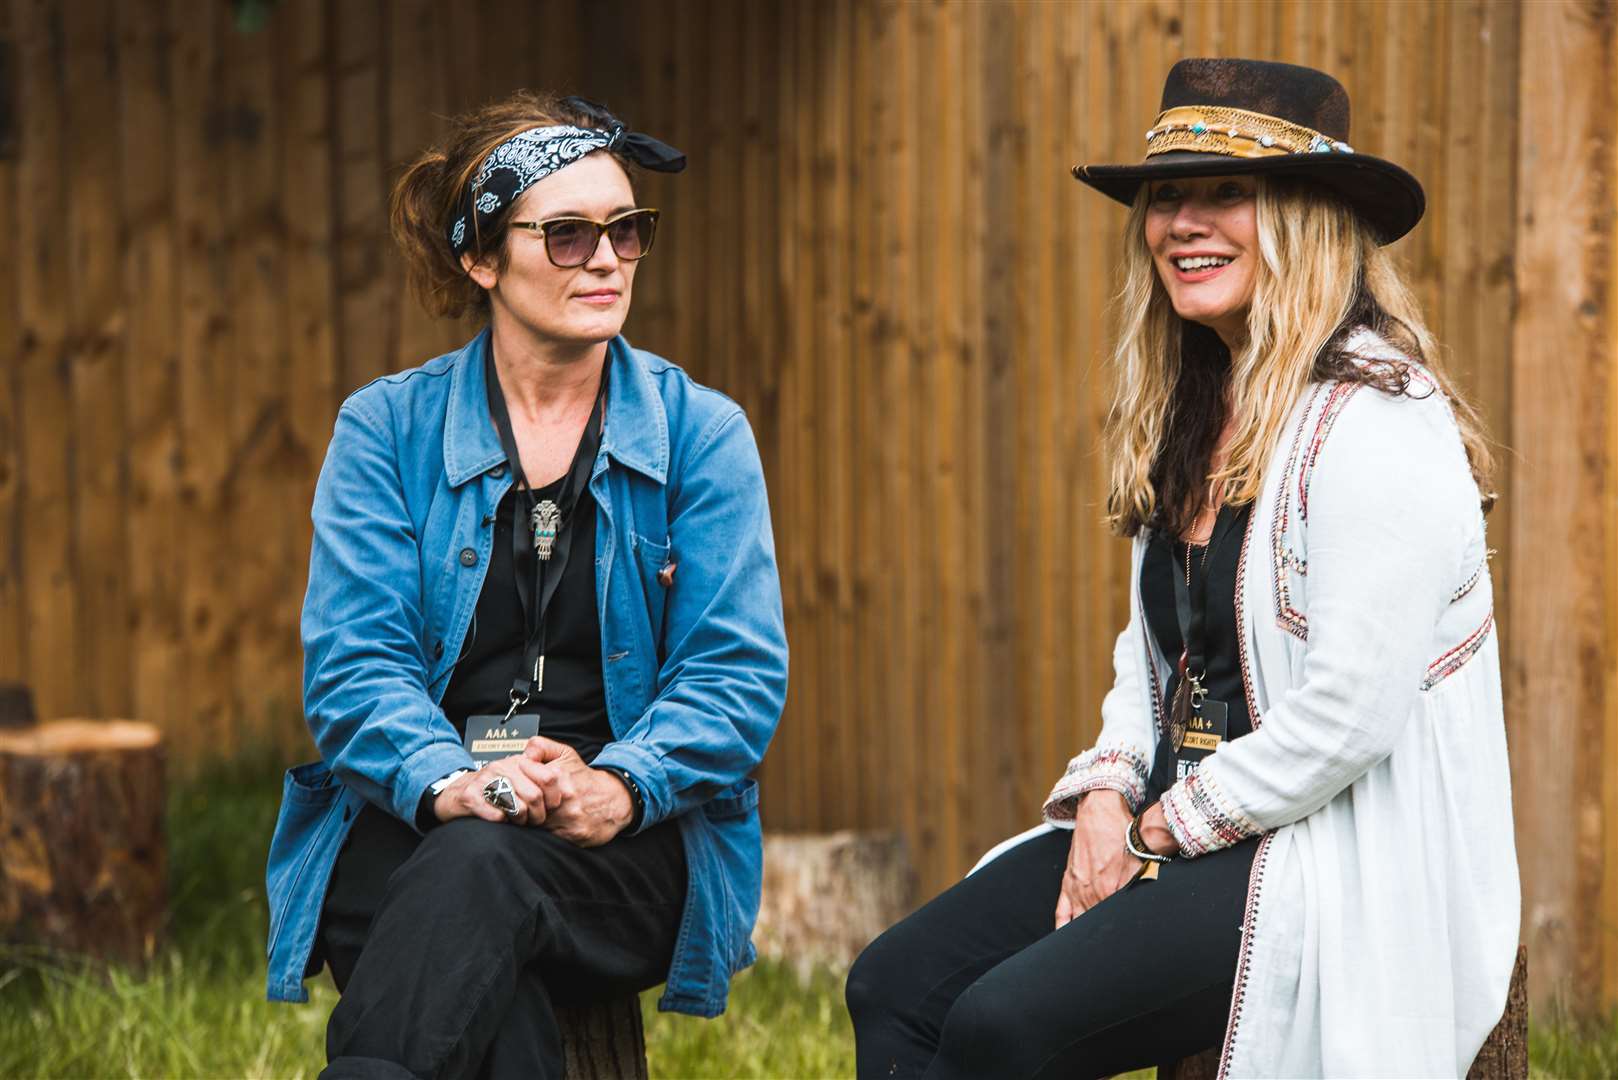 Founders of Black Deer, Gill Tee (right) and Deborah Shilling (left). Picture: Ania Shrimpton